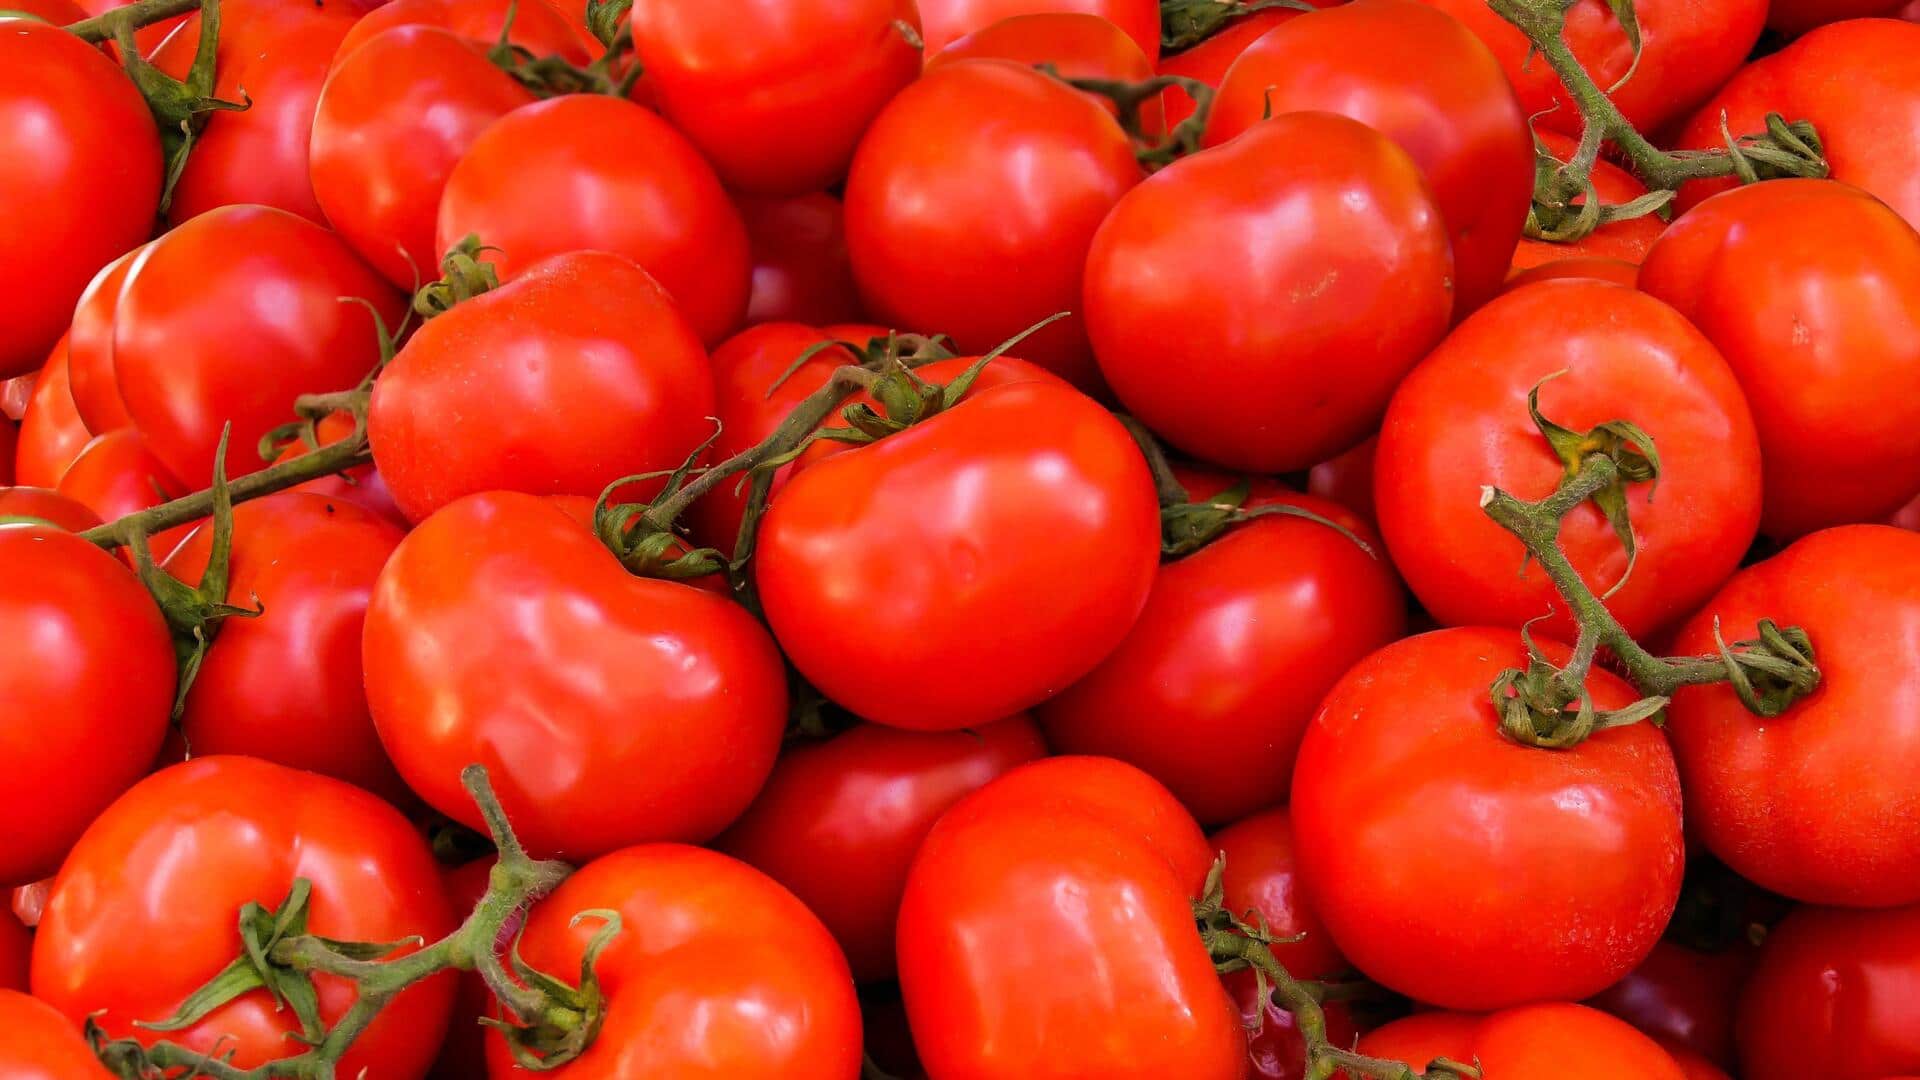 Tomato sales skyrocket on ONDC with 22,500 orders a month